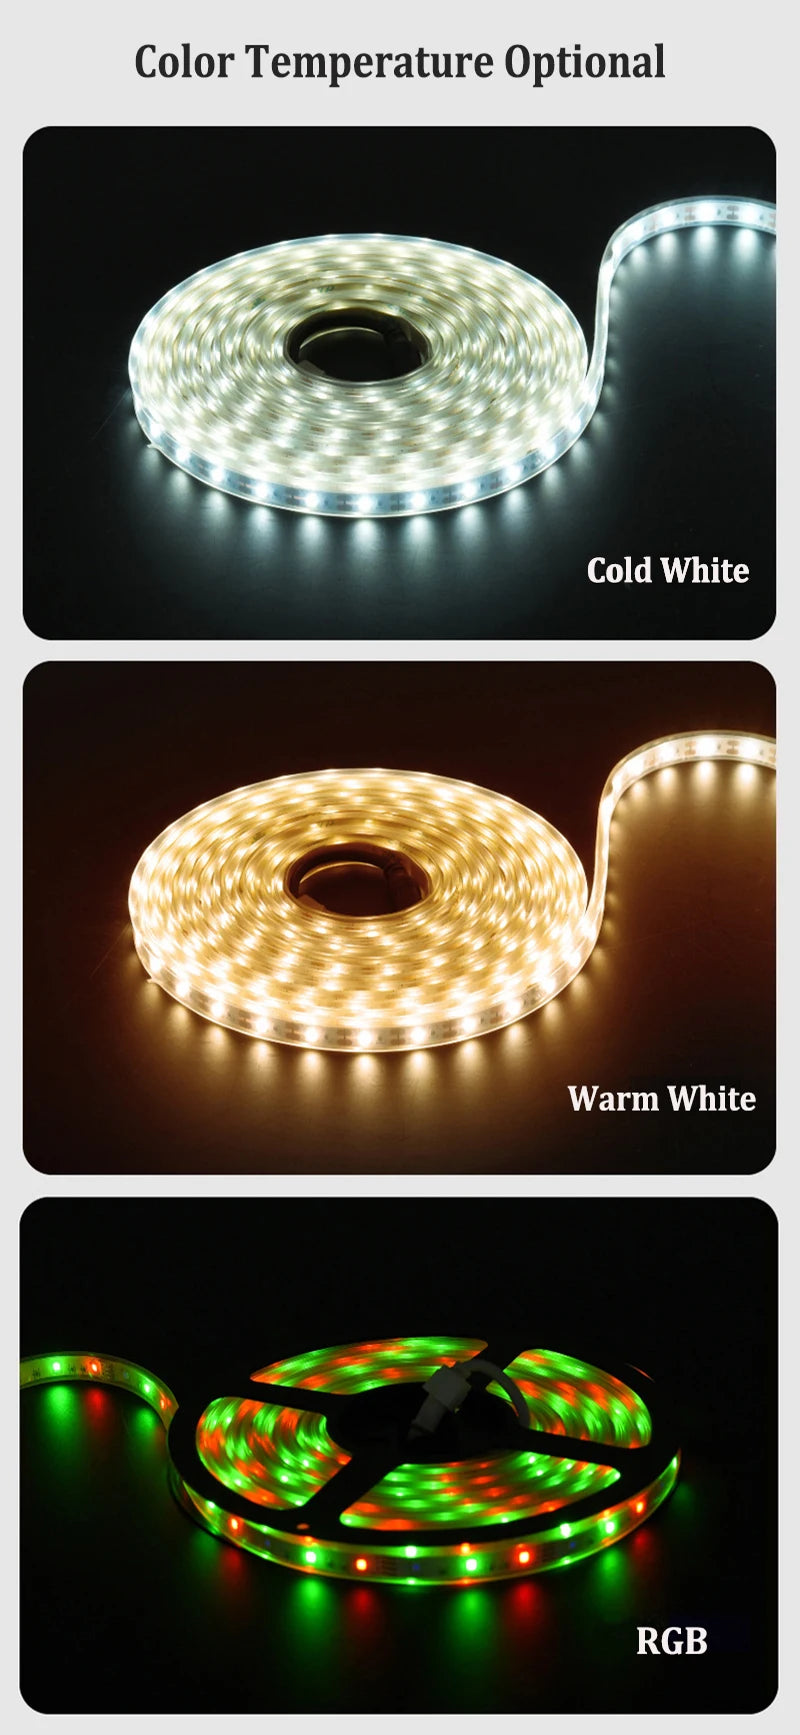 Solar LED Strip Light, Cold white, warm white, or RGB color temperature options available